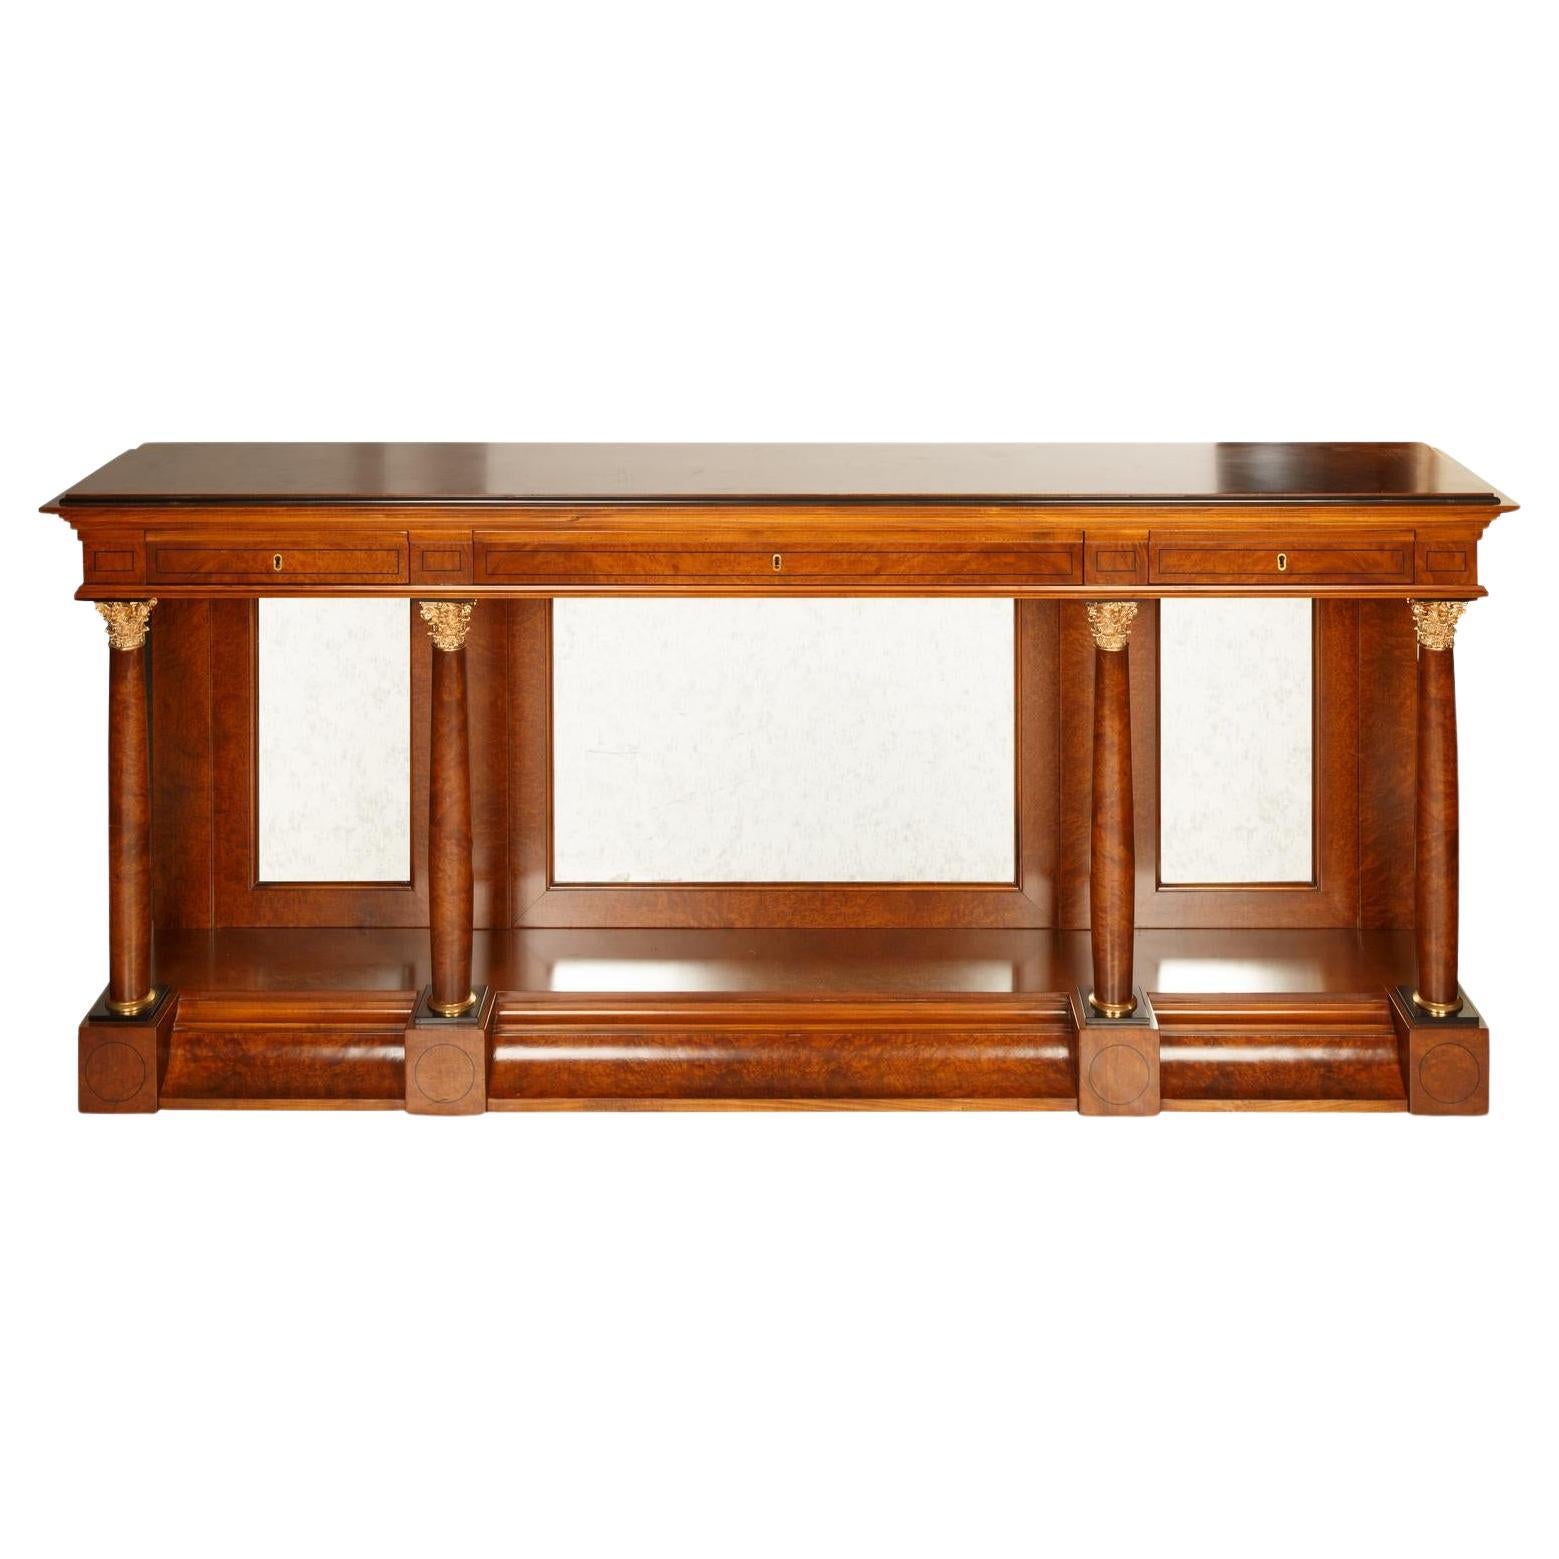 Neo Classical Style Burl Walnut Mirrored Back Console Table / Credenzas For Sale